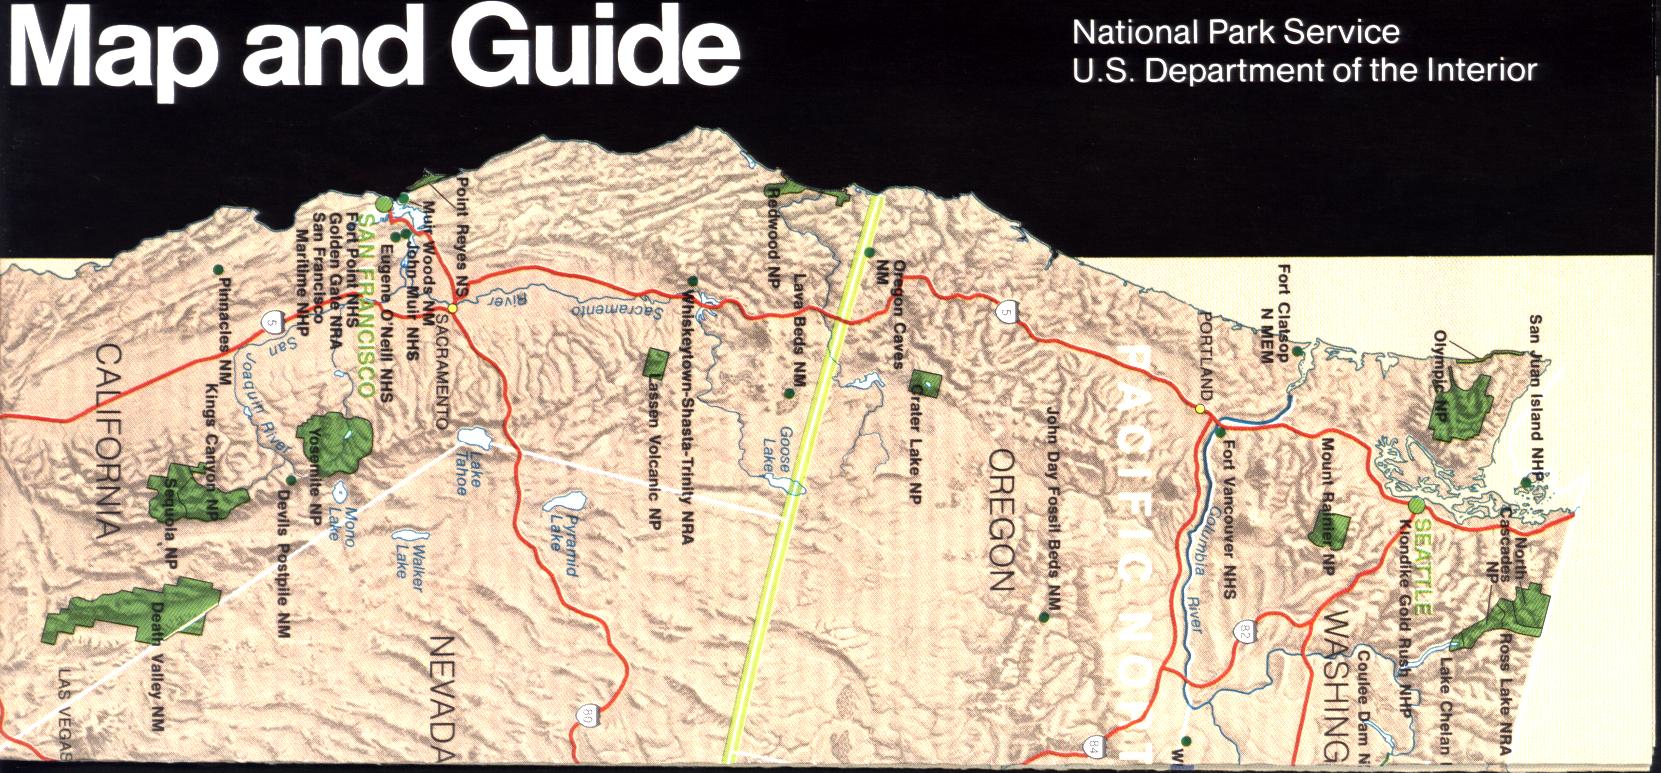 NATIONAL PARK SYSTEM MAP AND GUIDE. 